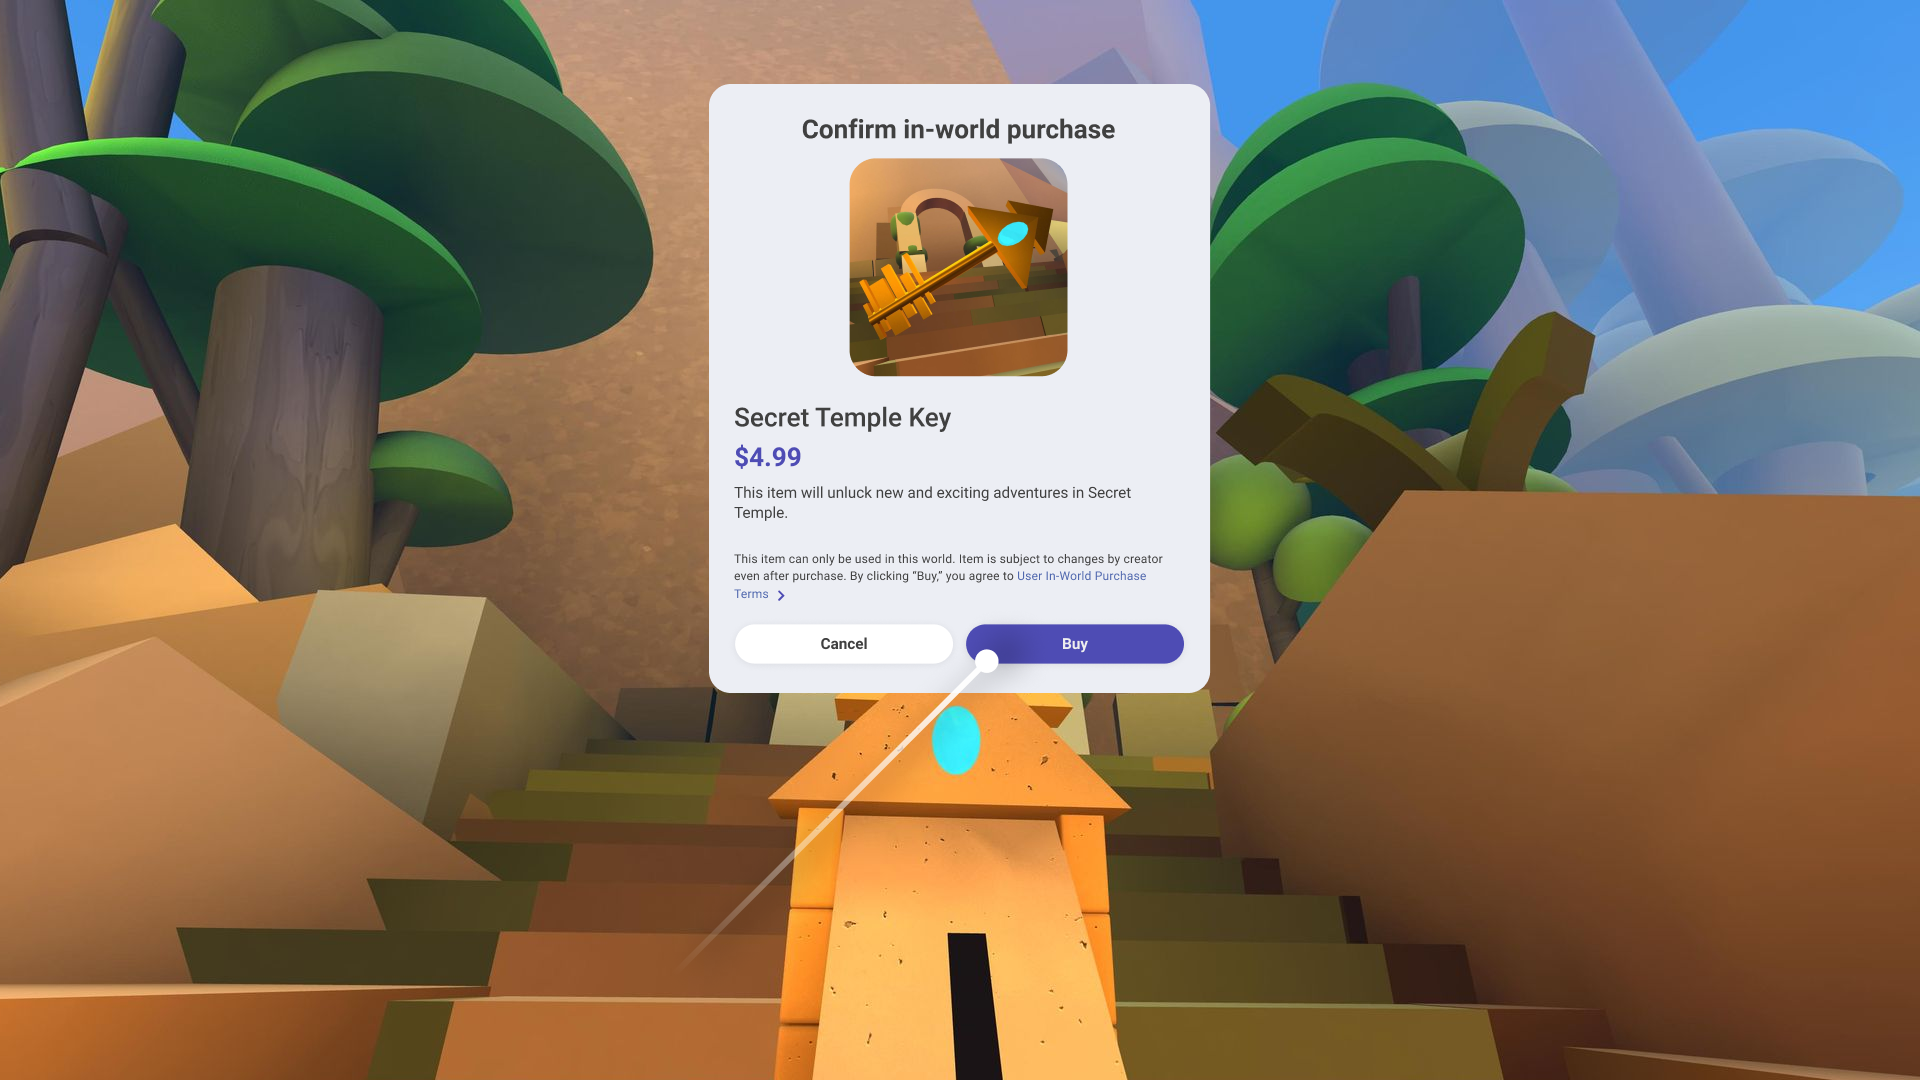 Roblox will give a handful of game developers $500,000 each to build its  future